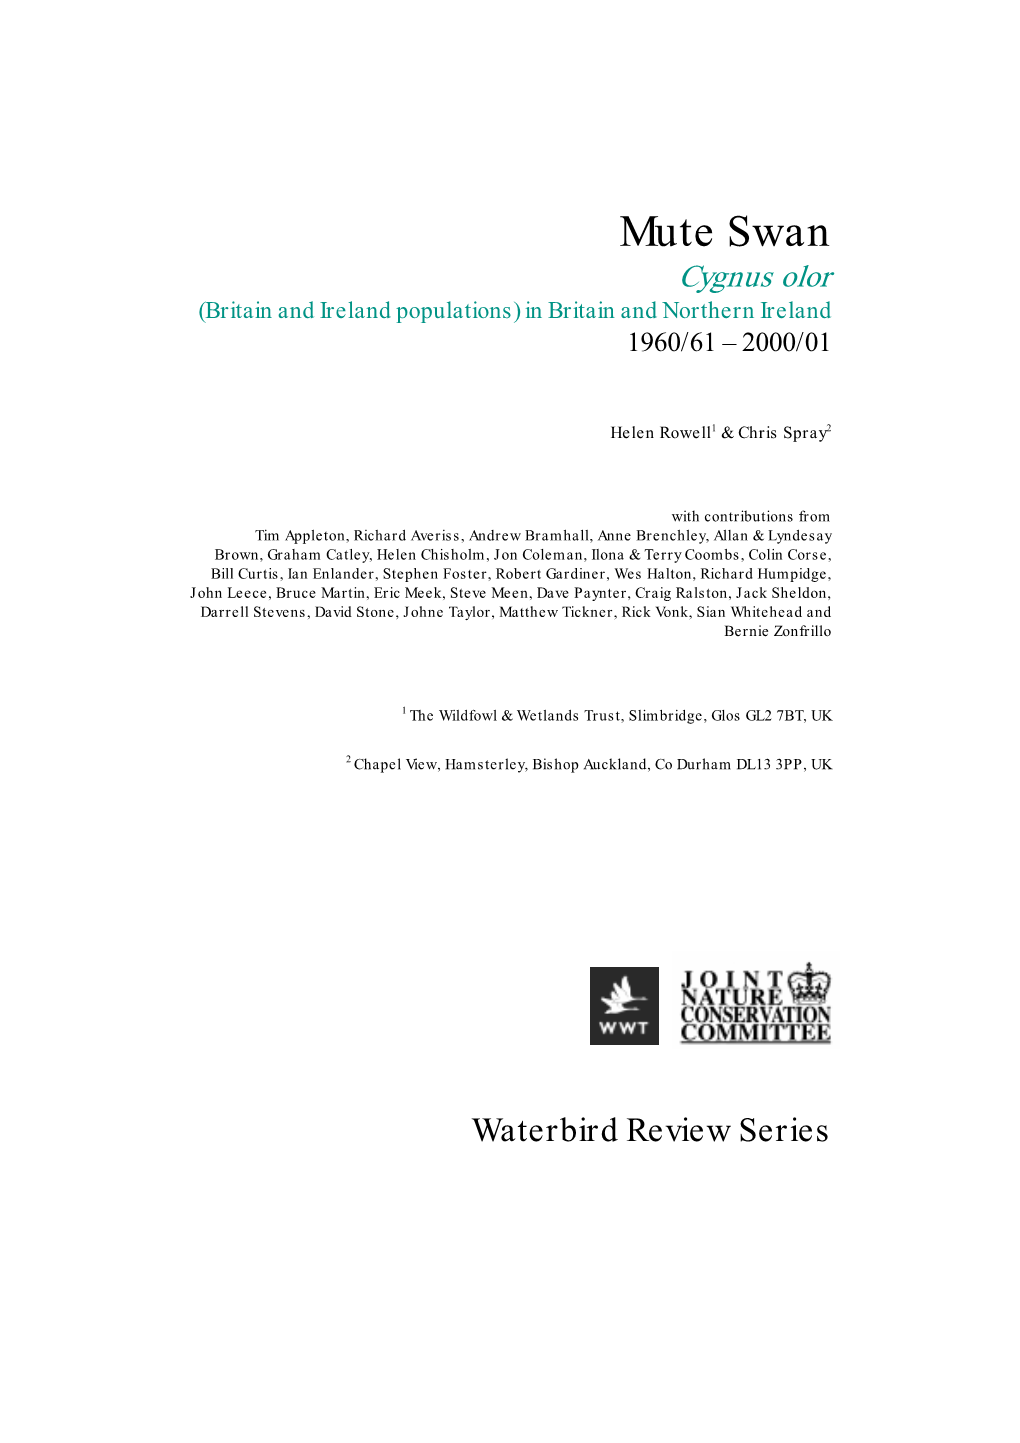 Mute Swan Cygnus Olor (Britain and Ireland Populations) in Britain and Northern Ireland 1960/61 – 2000/01